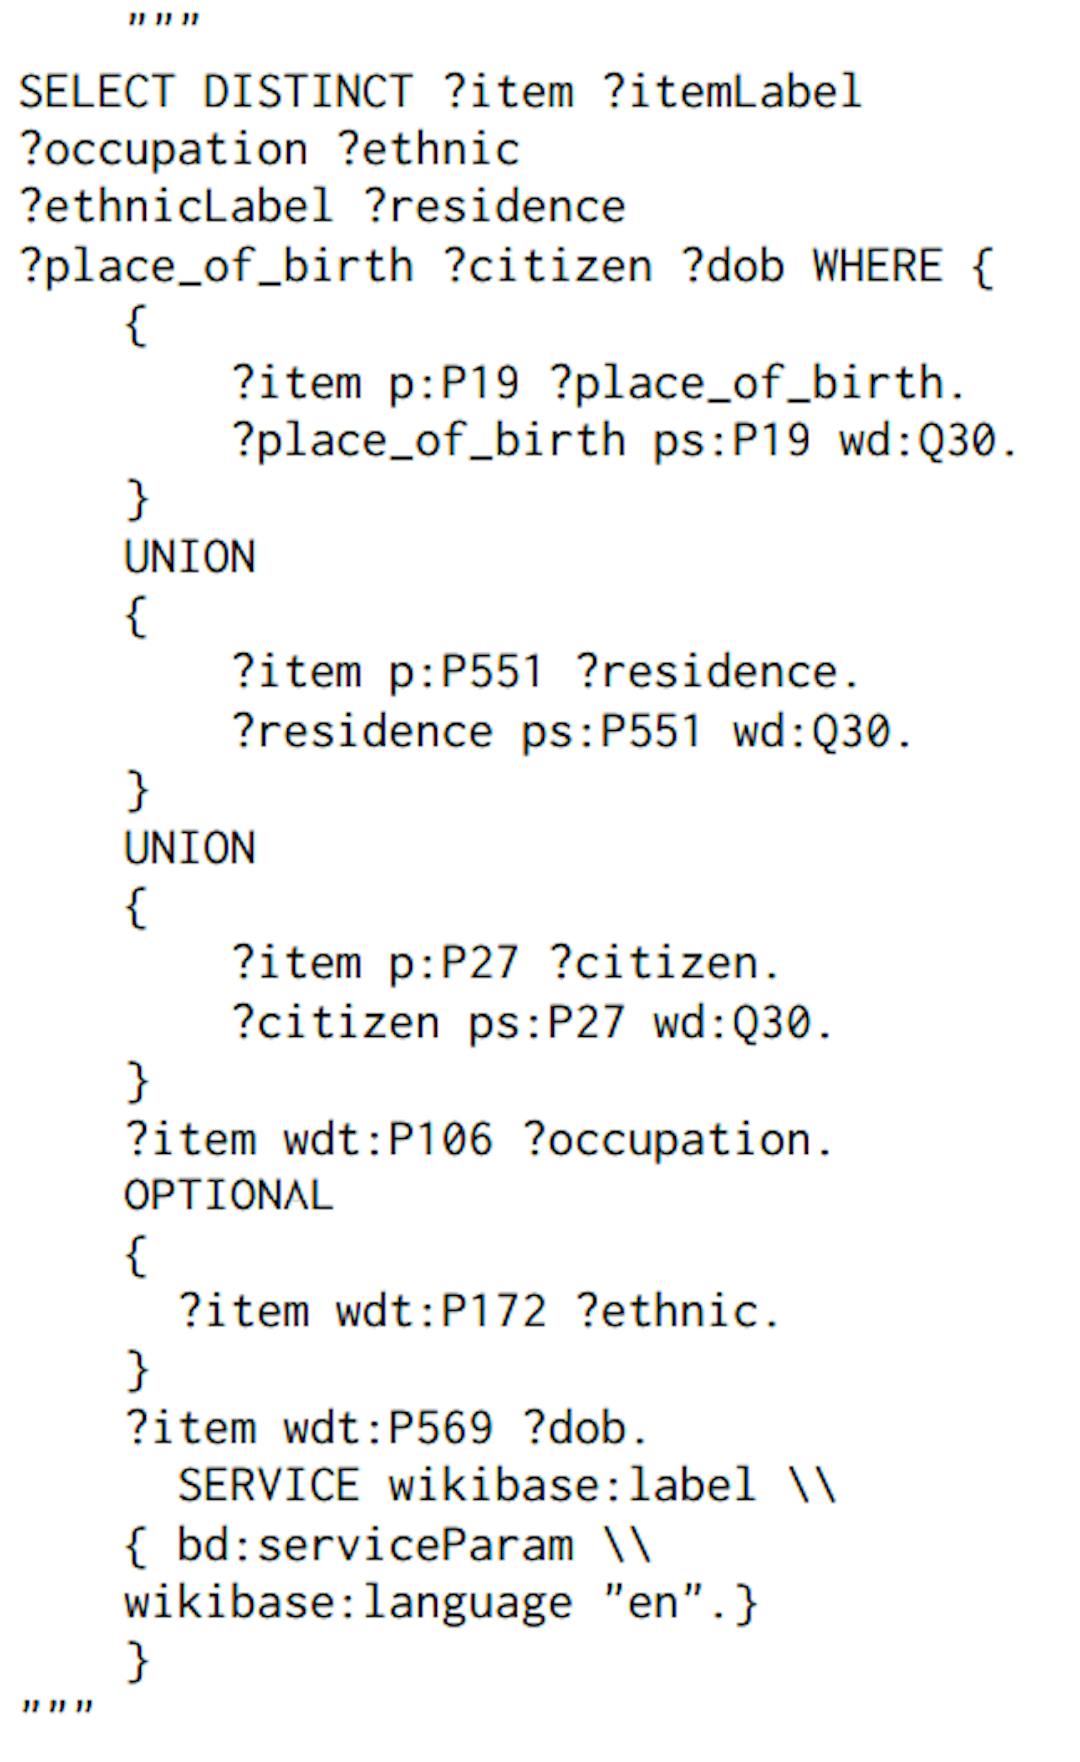 Figure 8: Wikidata query for extracting individuals that are born in, residents of or citizens of the United States.